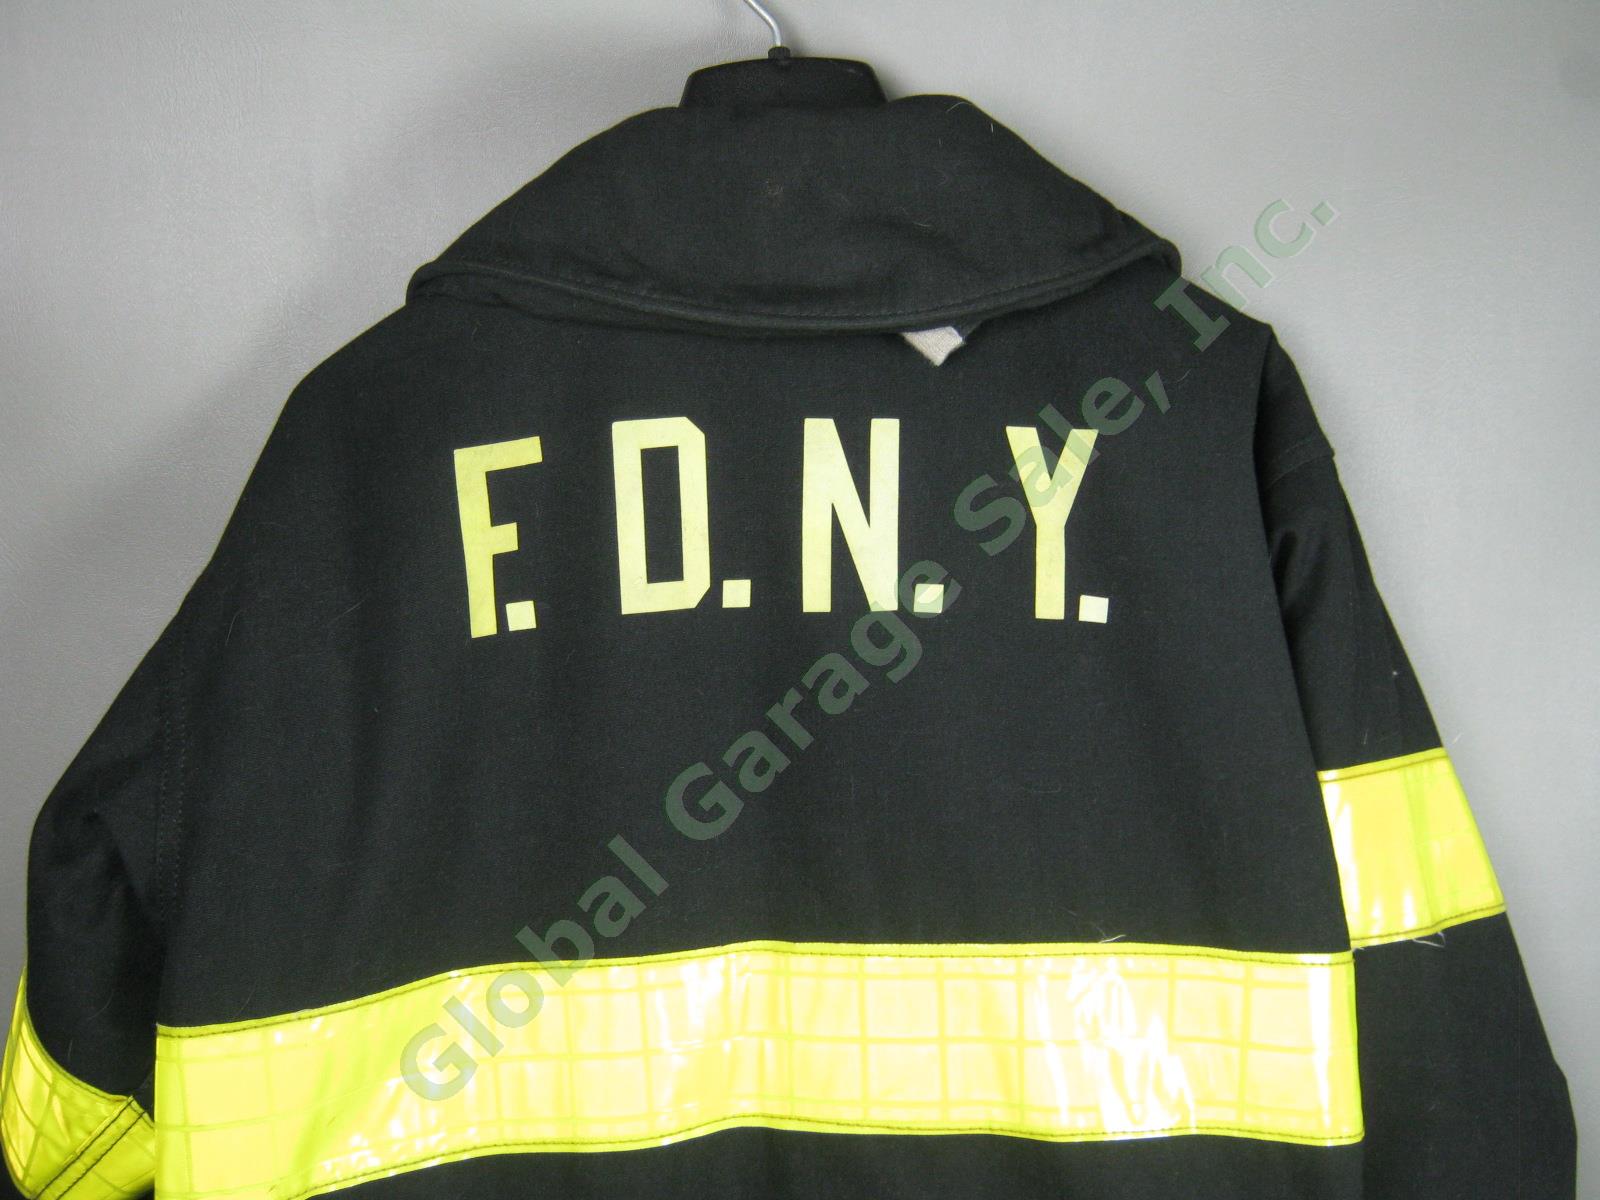 Morning Pride FDNY NY NYC Fire Dept Summer Firefighter Turnout Jacket 44 EXC!! 5